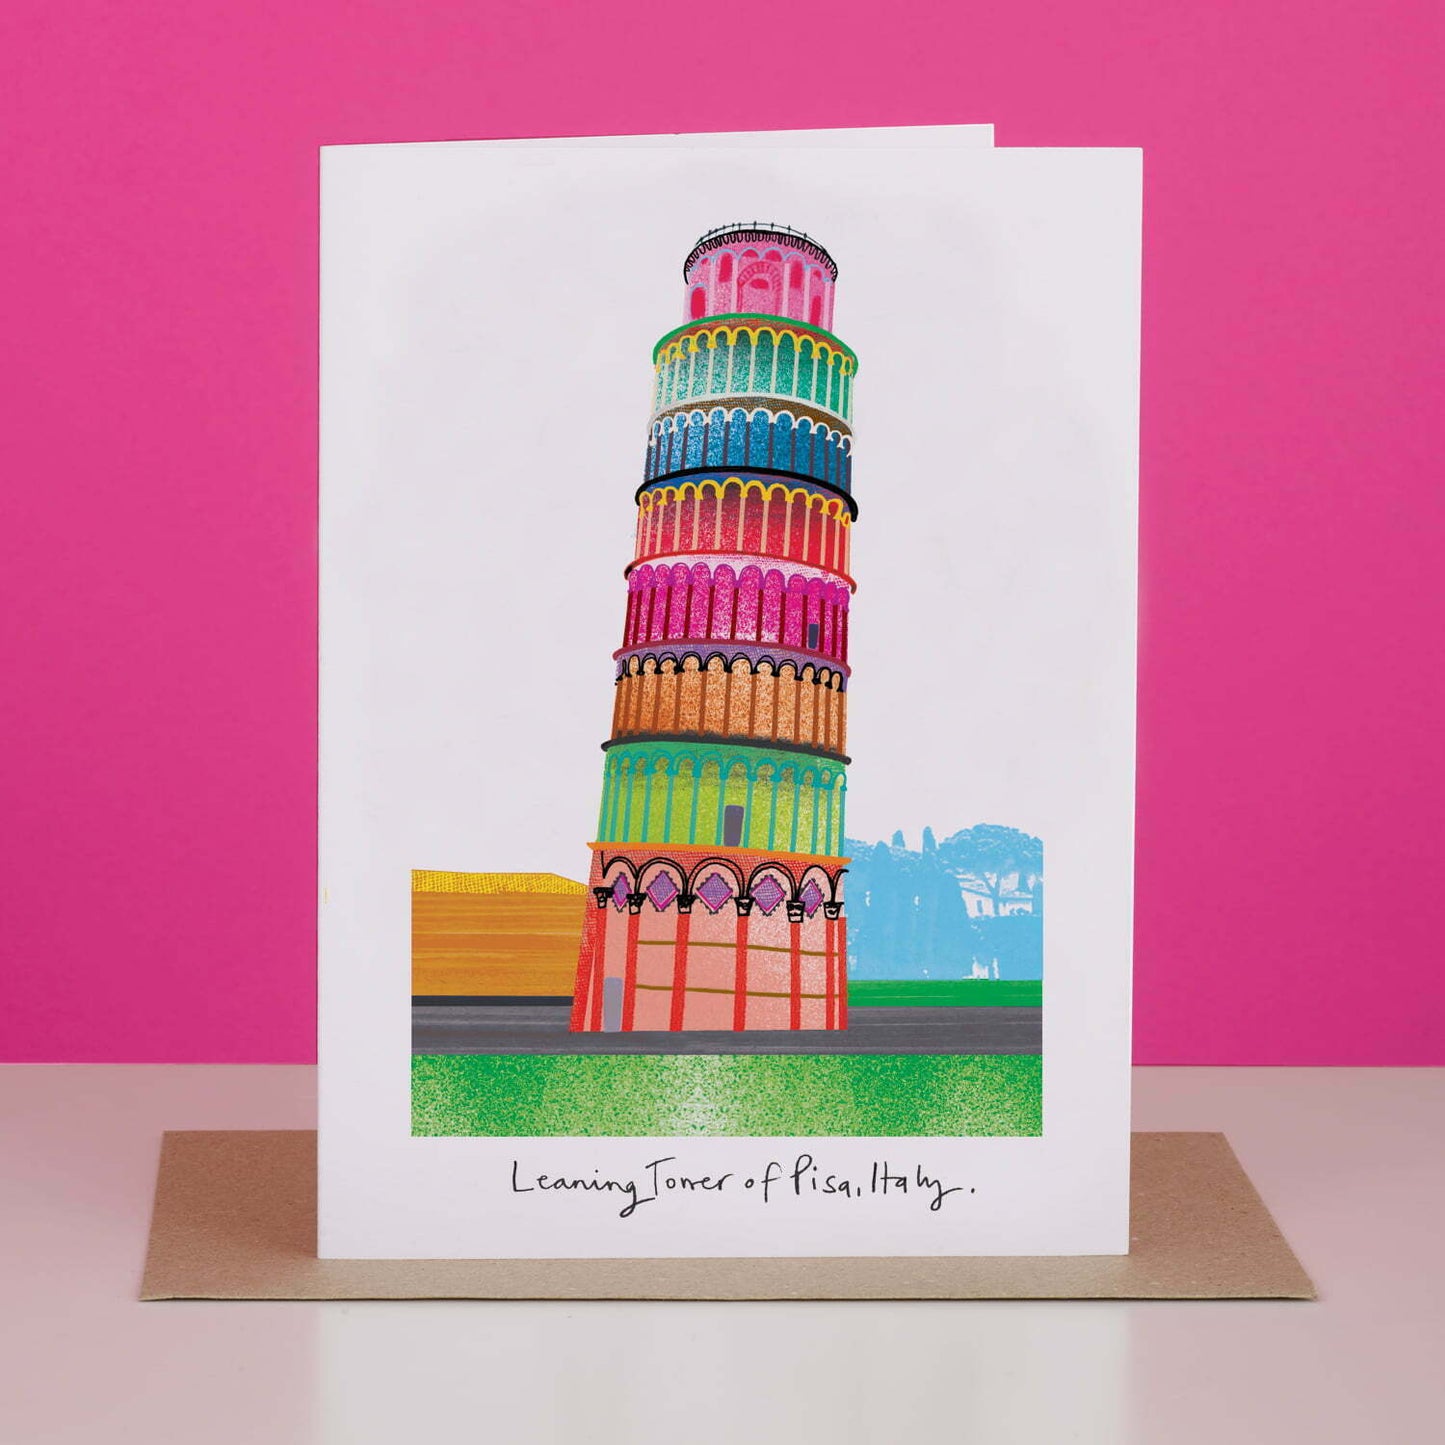 LEANING TOWER OF PISA CARD